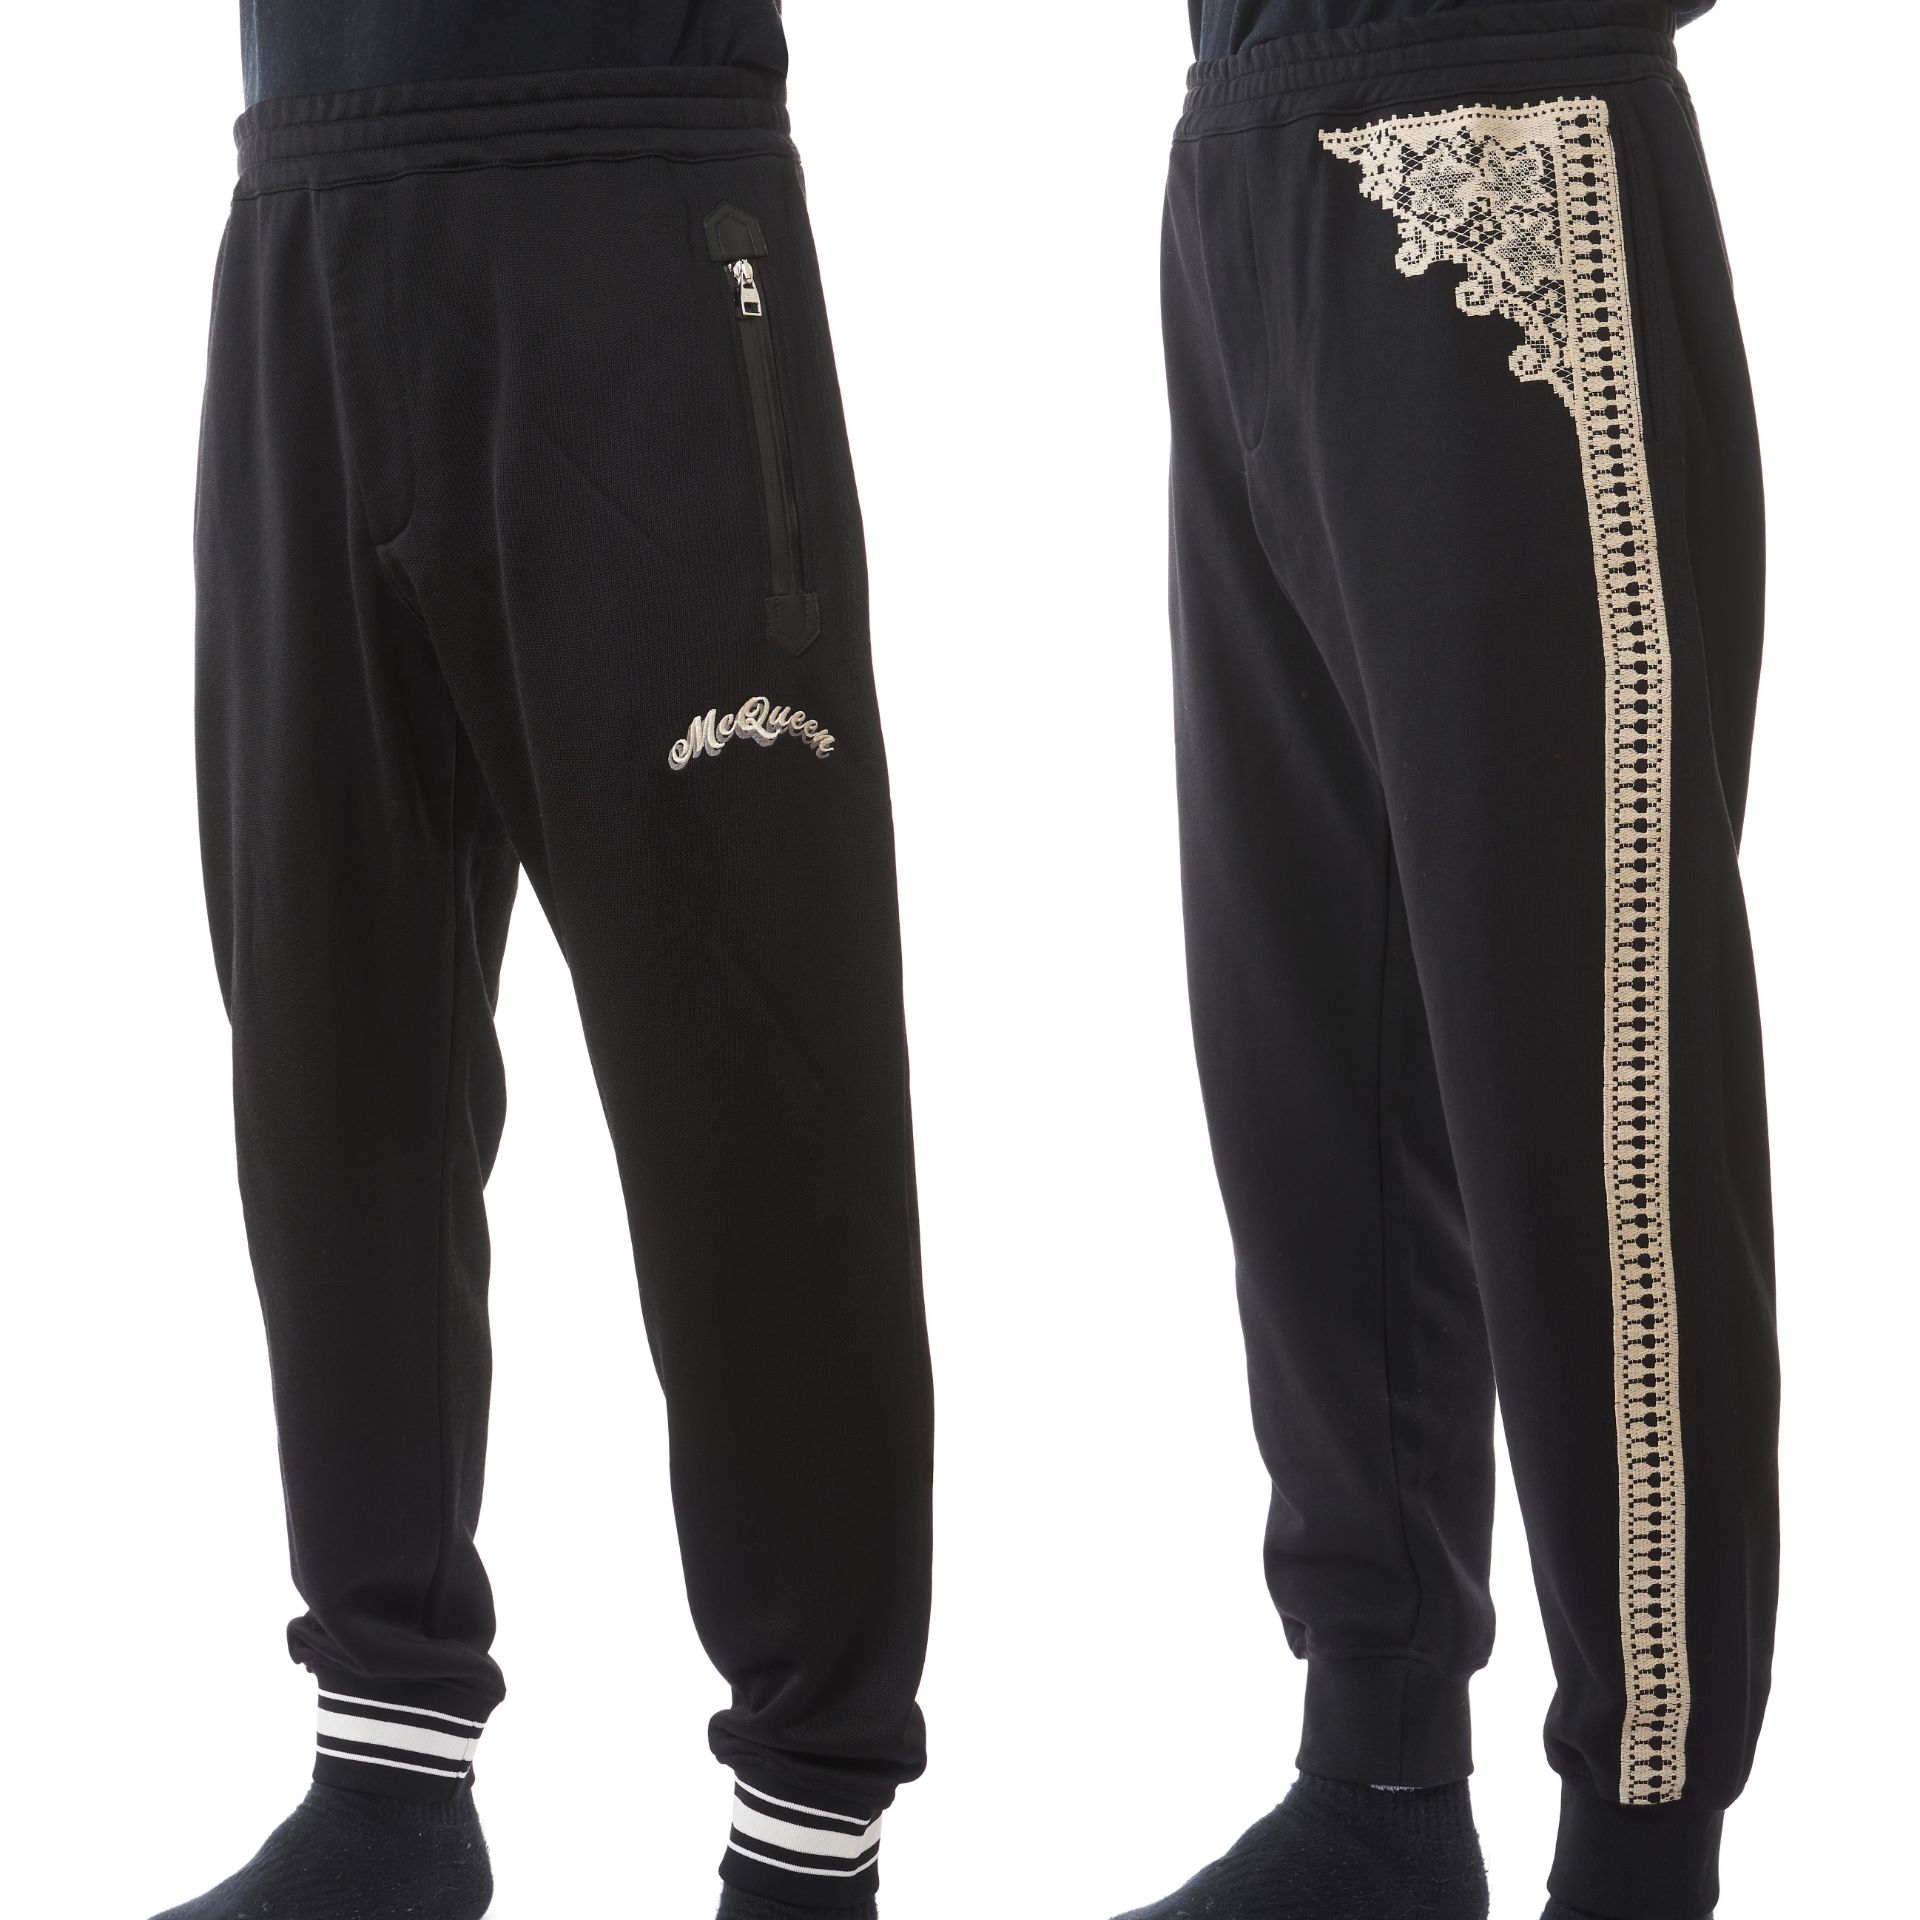 NO RESERVE TWO PAIRS OF ALEXANDER MCQUEEN JOGGERS